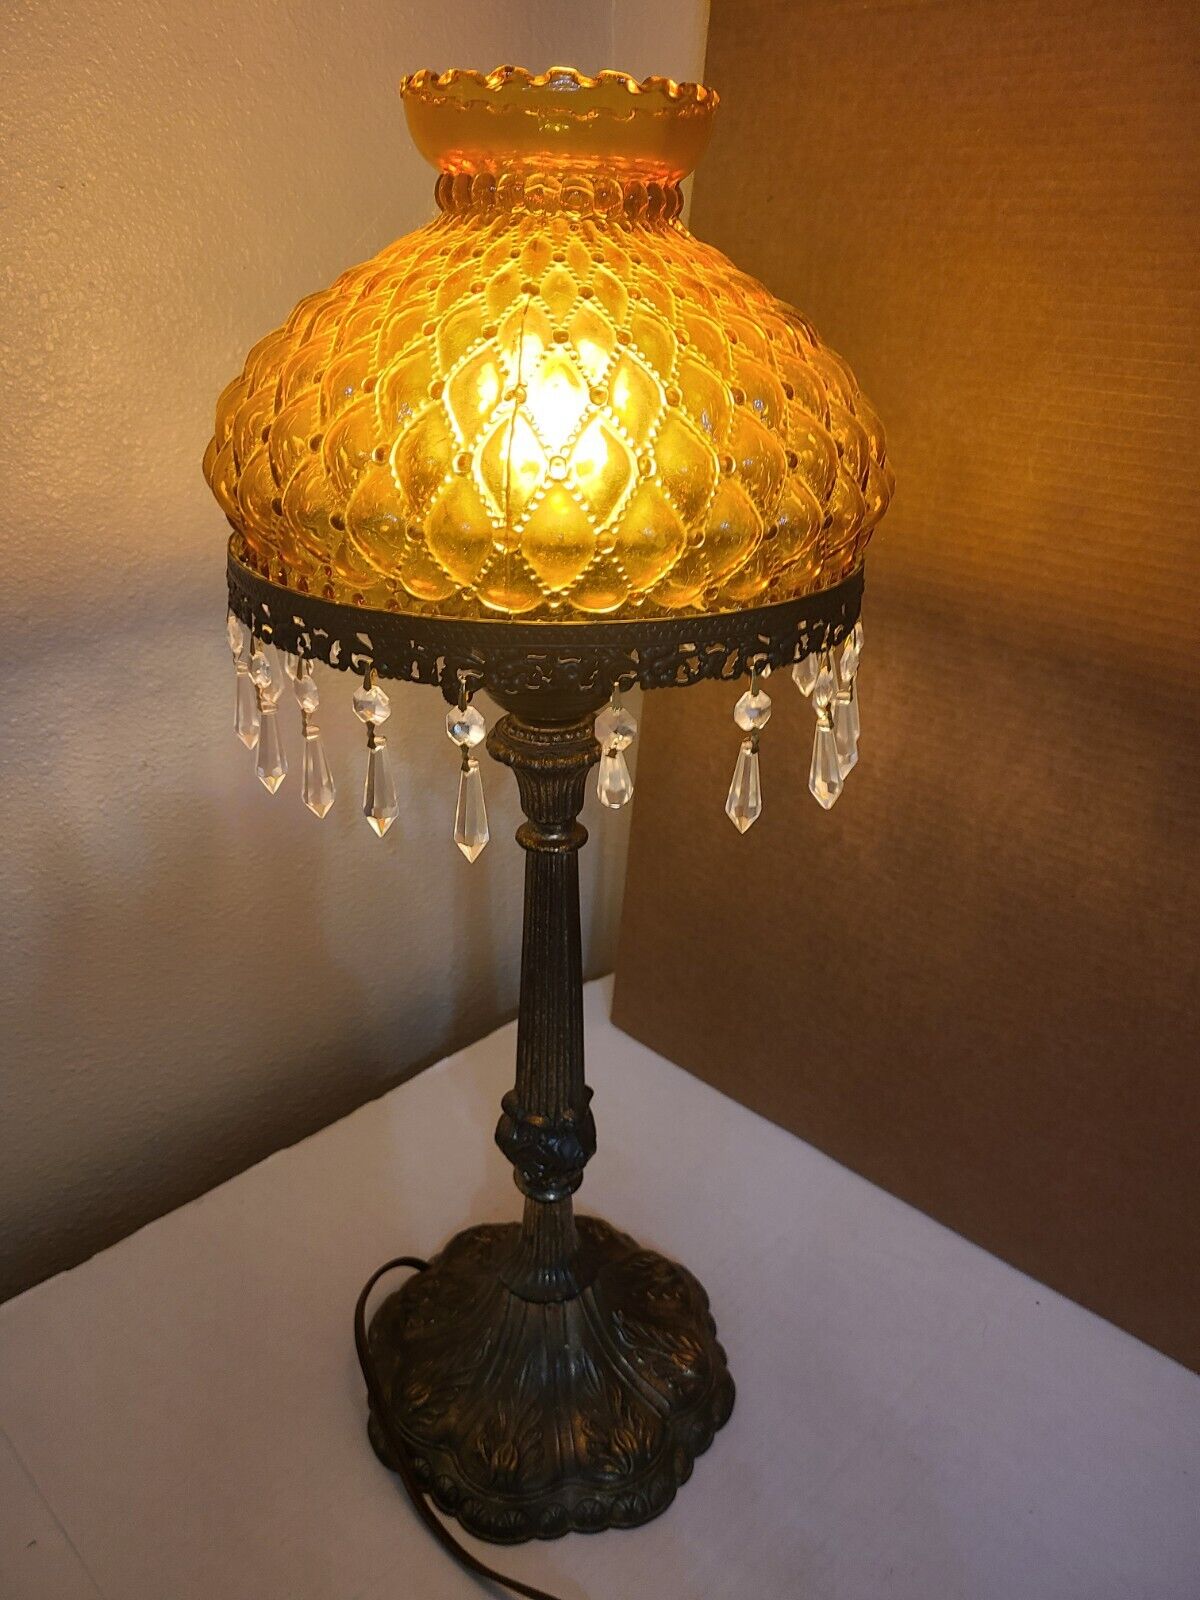 BEAUTIFUL Antique Bronze/Brass Amber Lamp with  Crystals Teardrops - LOOK